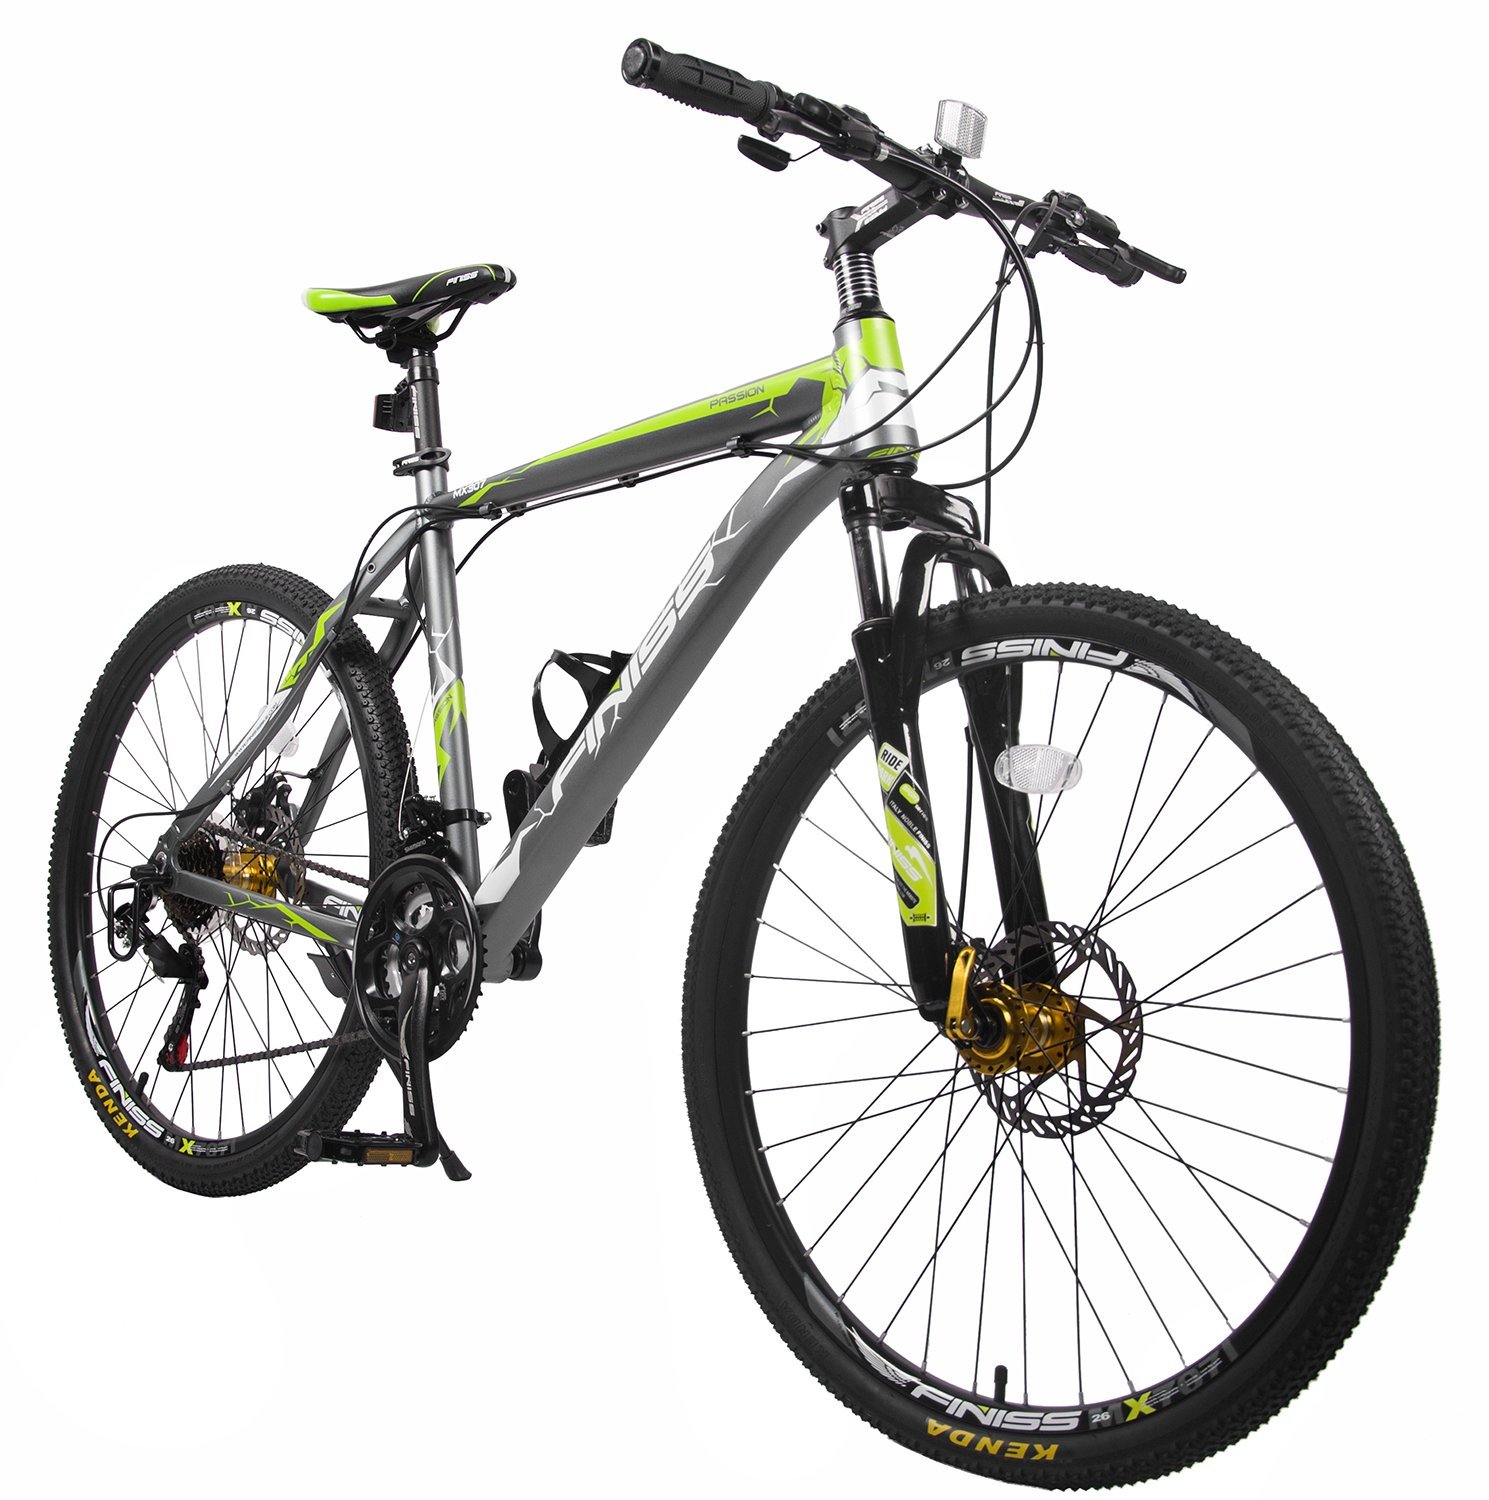 Top 10 Best Mountain Bikes Reviews You Should buy